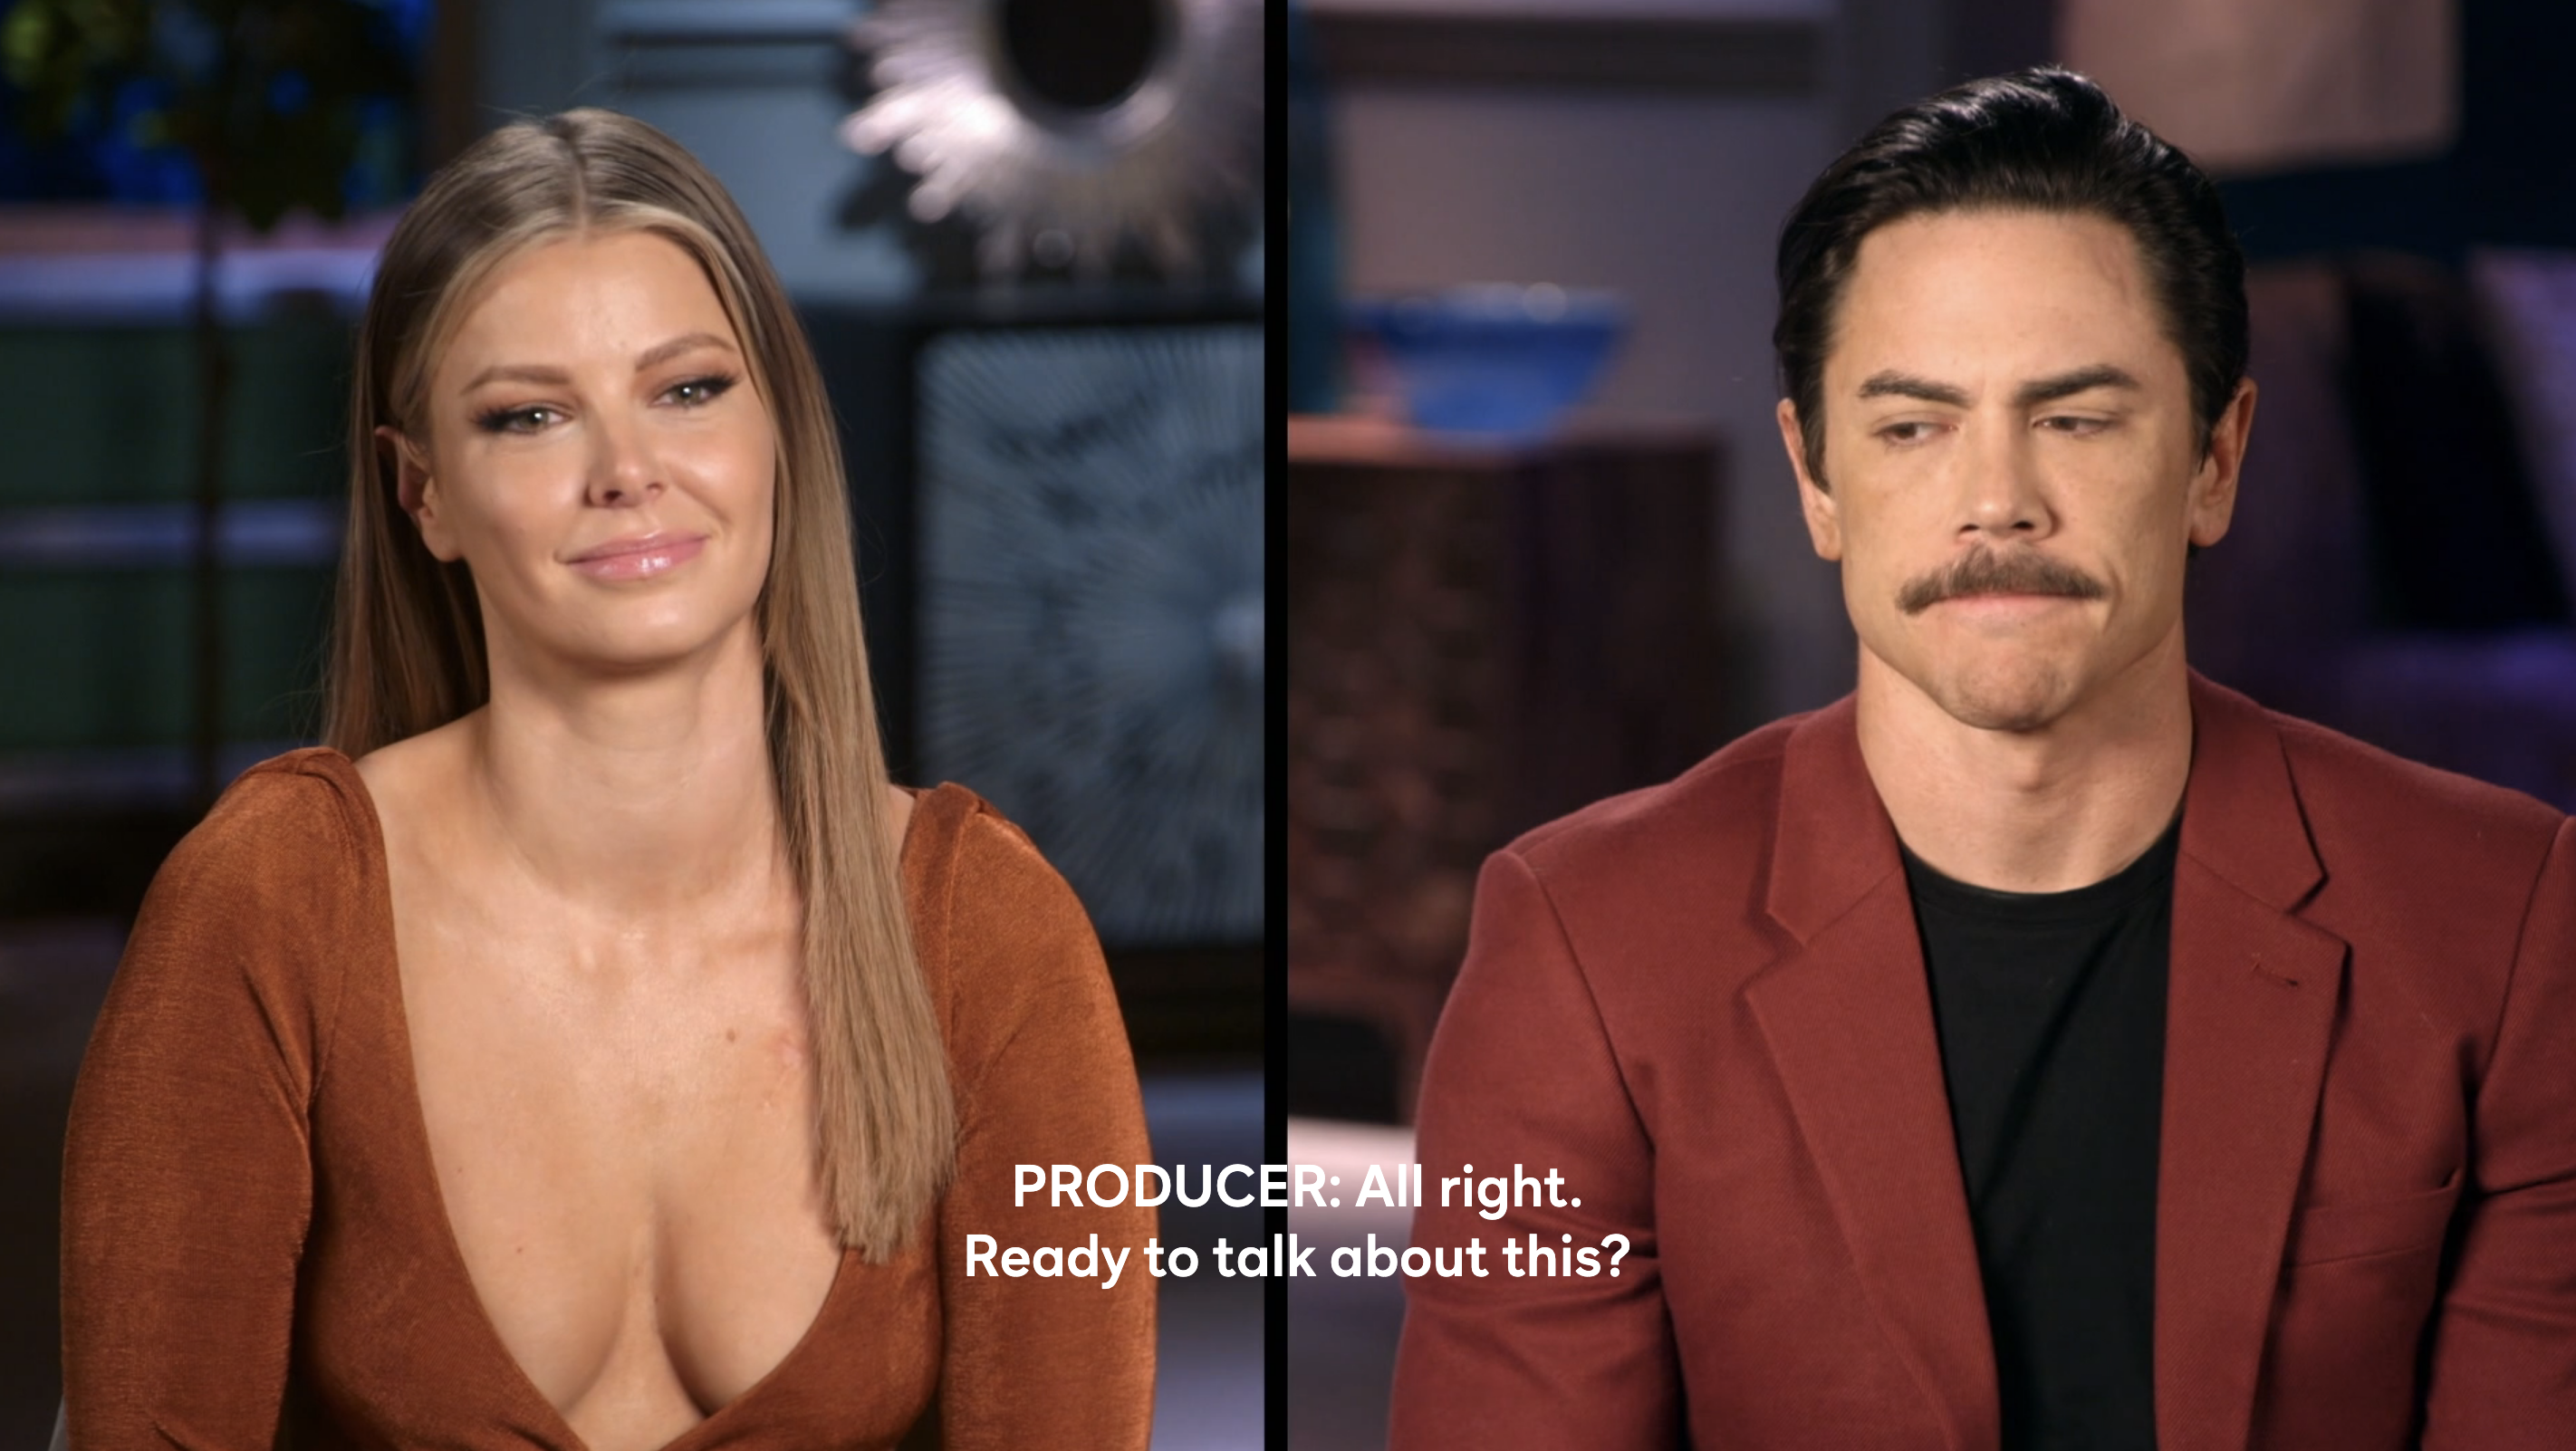 Ariana Madix and Tom Sandoval in interview setting with subtitle text: &quot;PRODUCER: All right. Ready to talk about this?&quot;